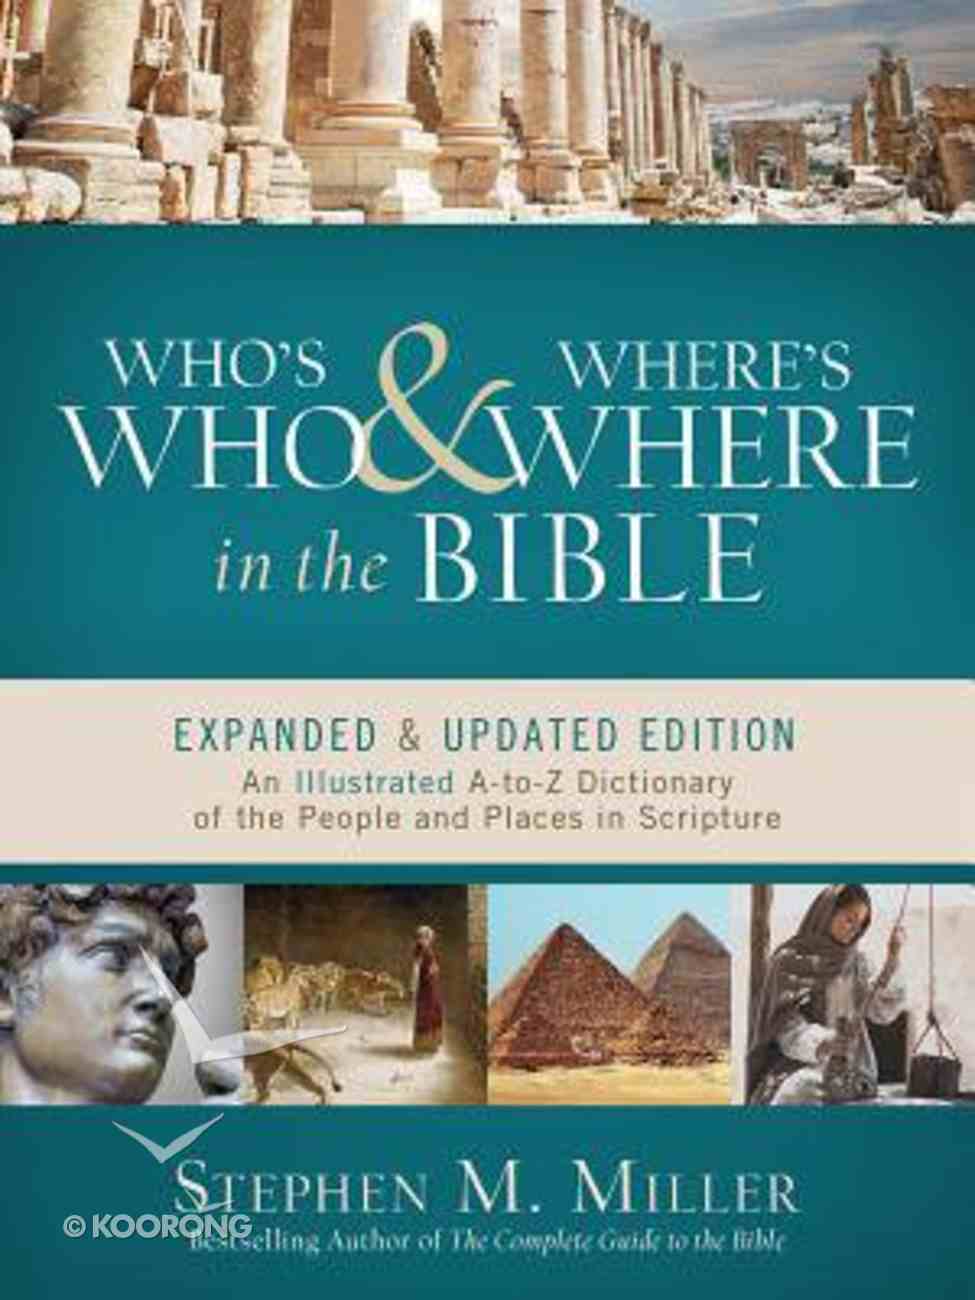 Who's Who and Where's Where in the Bible Paperback